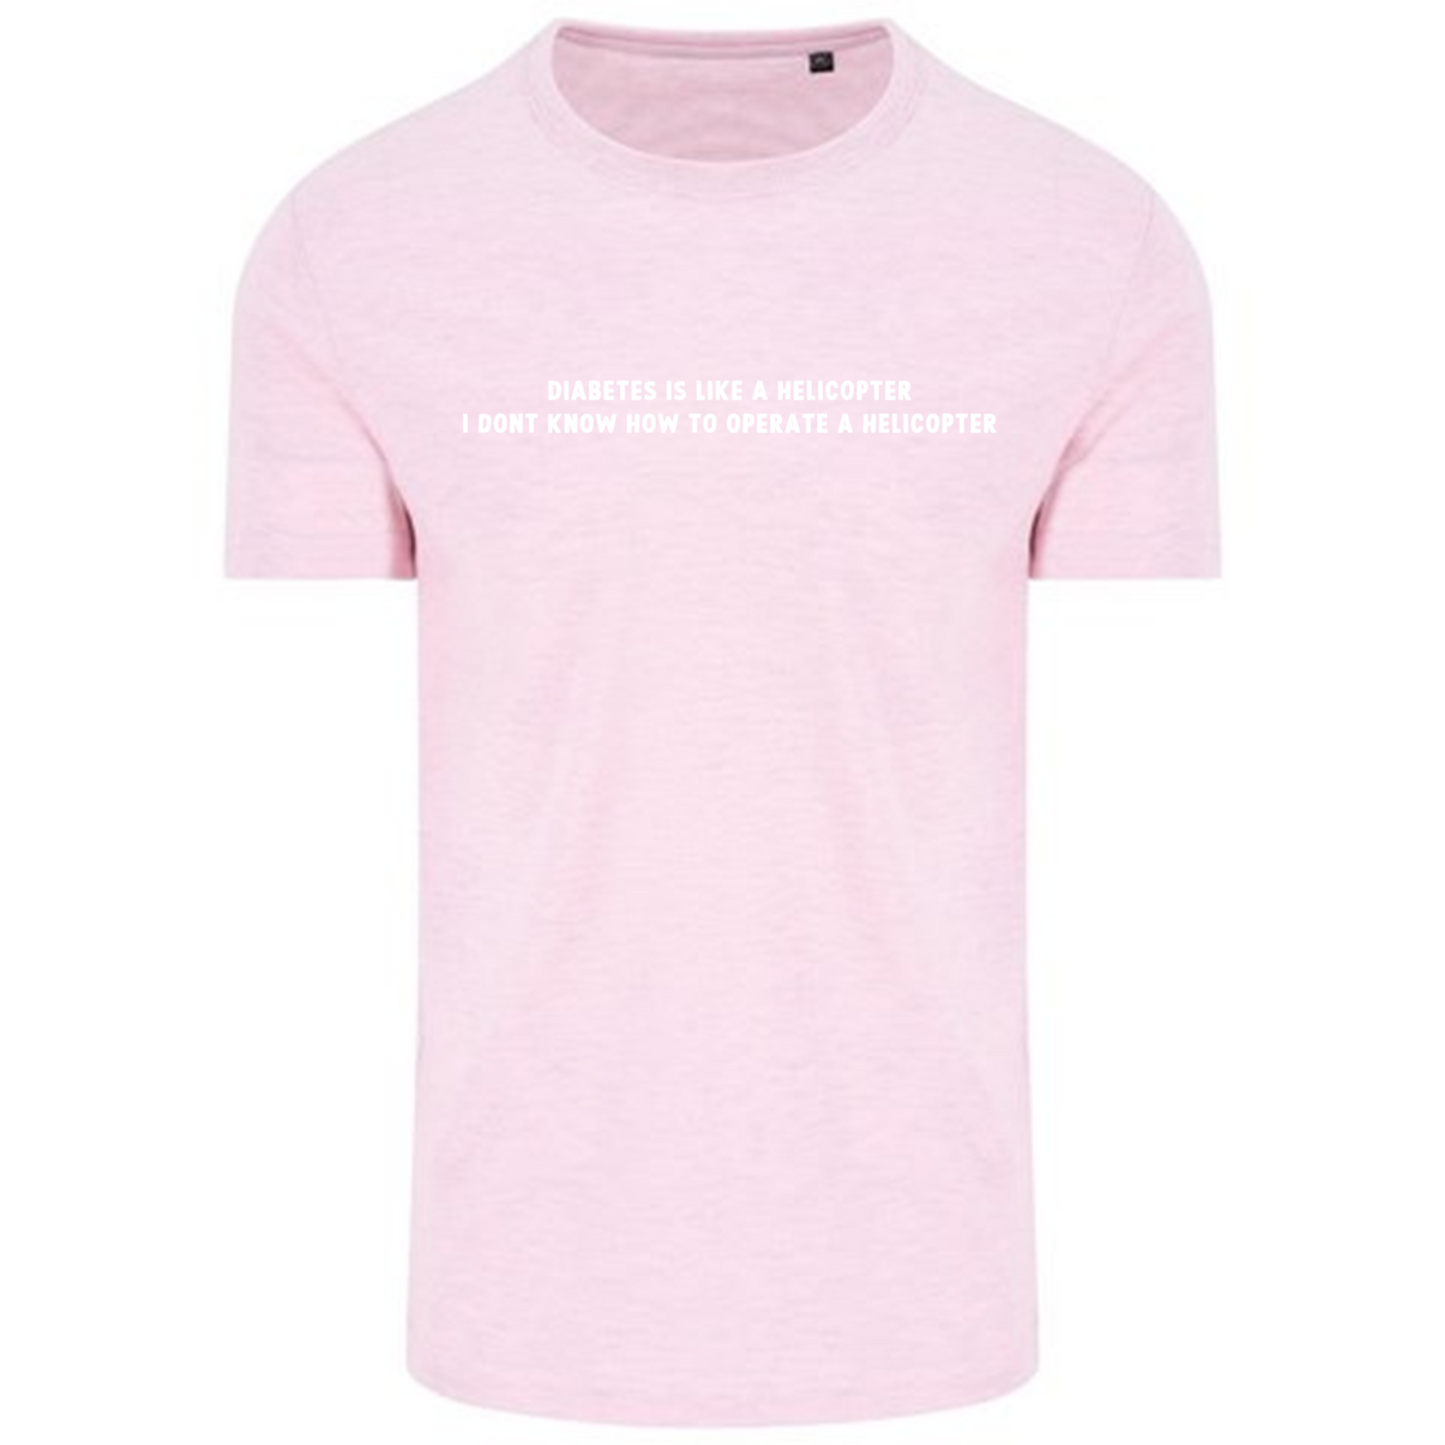 Diabetes Is Like A Helicopter, I Dont Know How To Operate A Helicopter Pastel T-Shirt